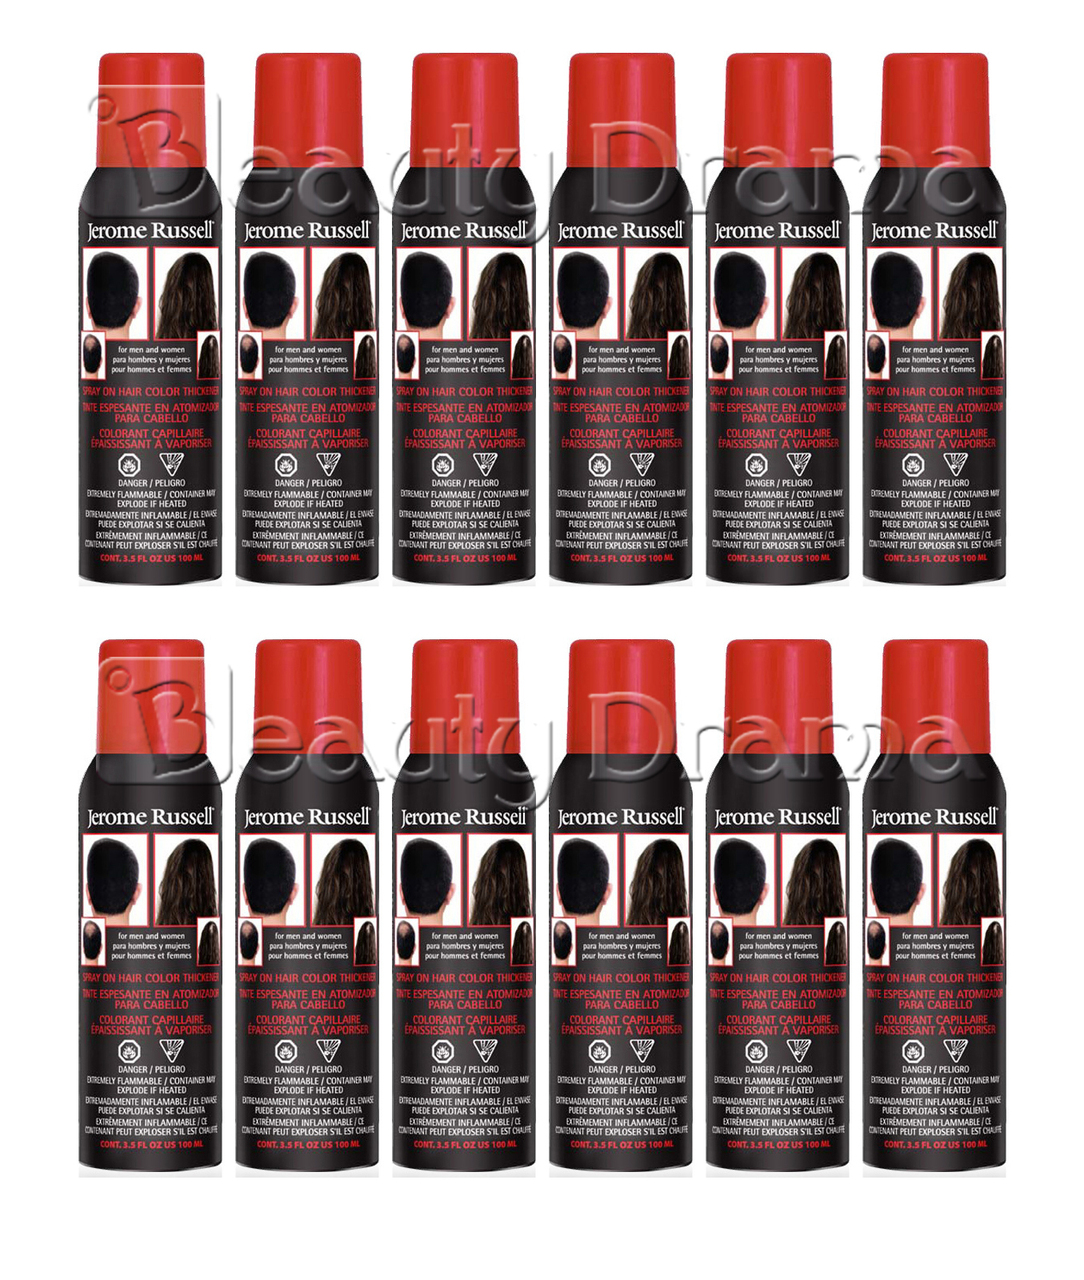 Jerome Russell Spray on Hair Color Thickener JET BLACK 12 pcs Deal